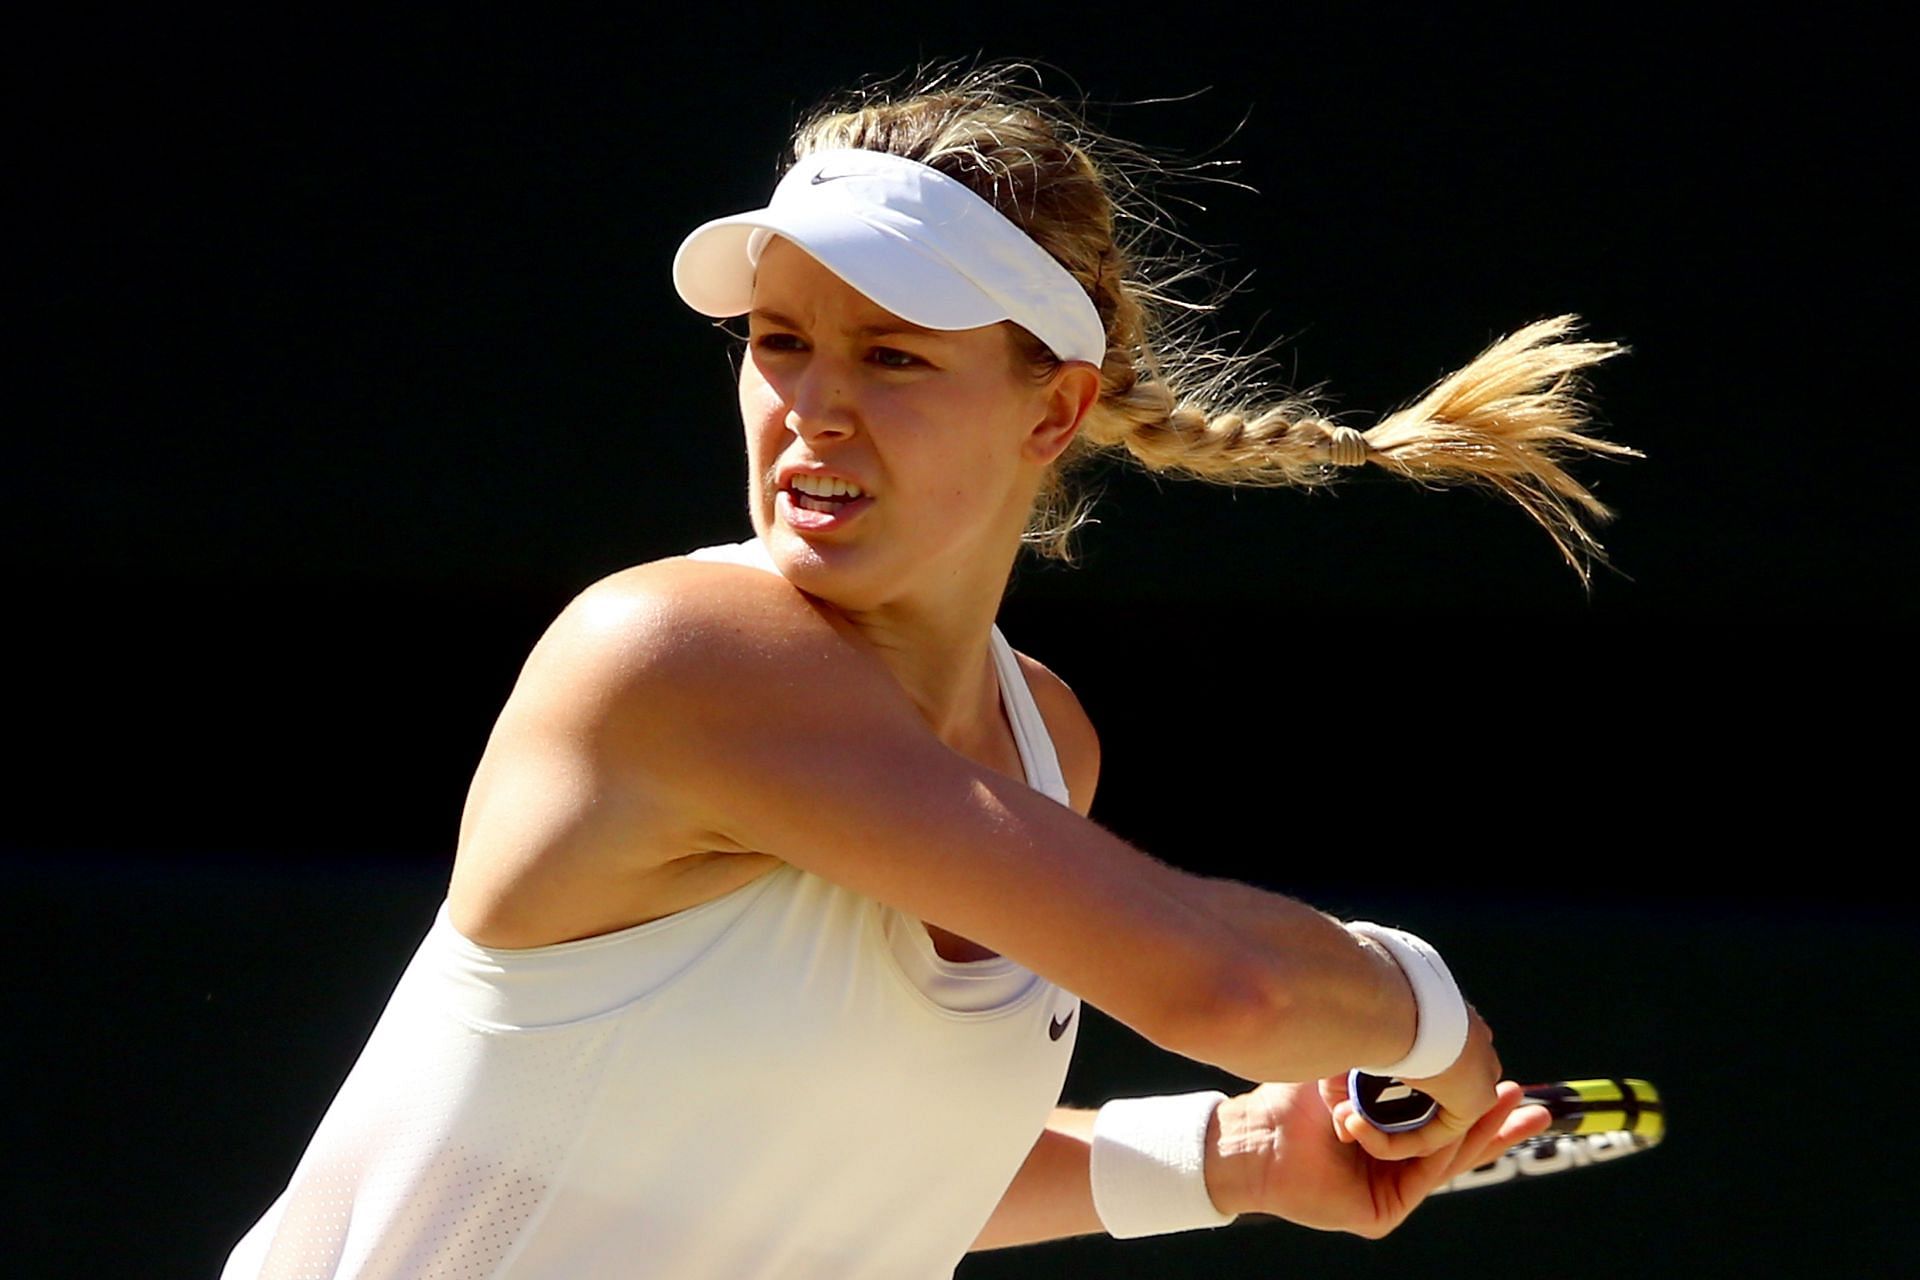 Eugenie Bouchard burst onto the scene but never fulfilled her potential